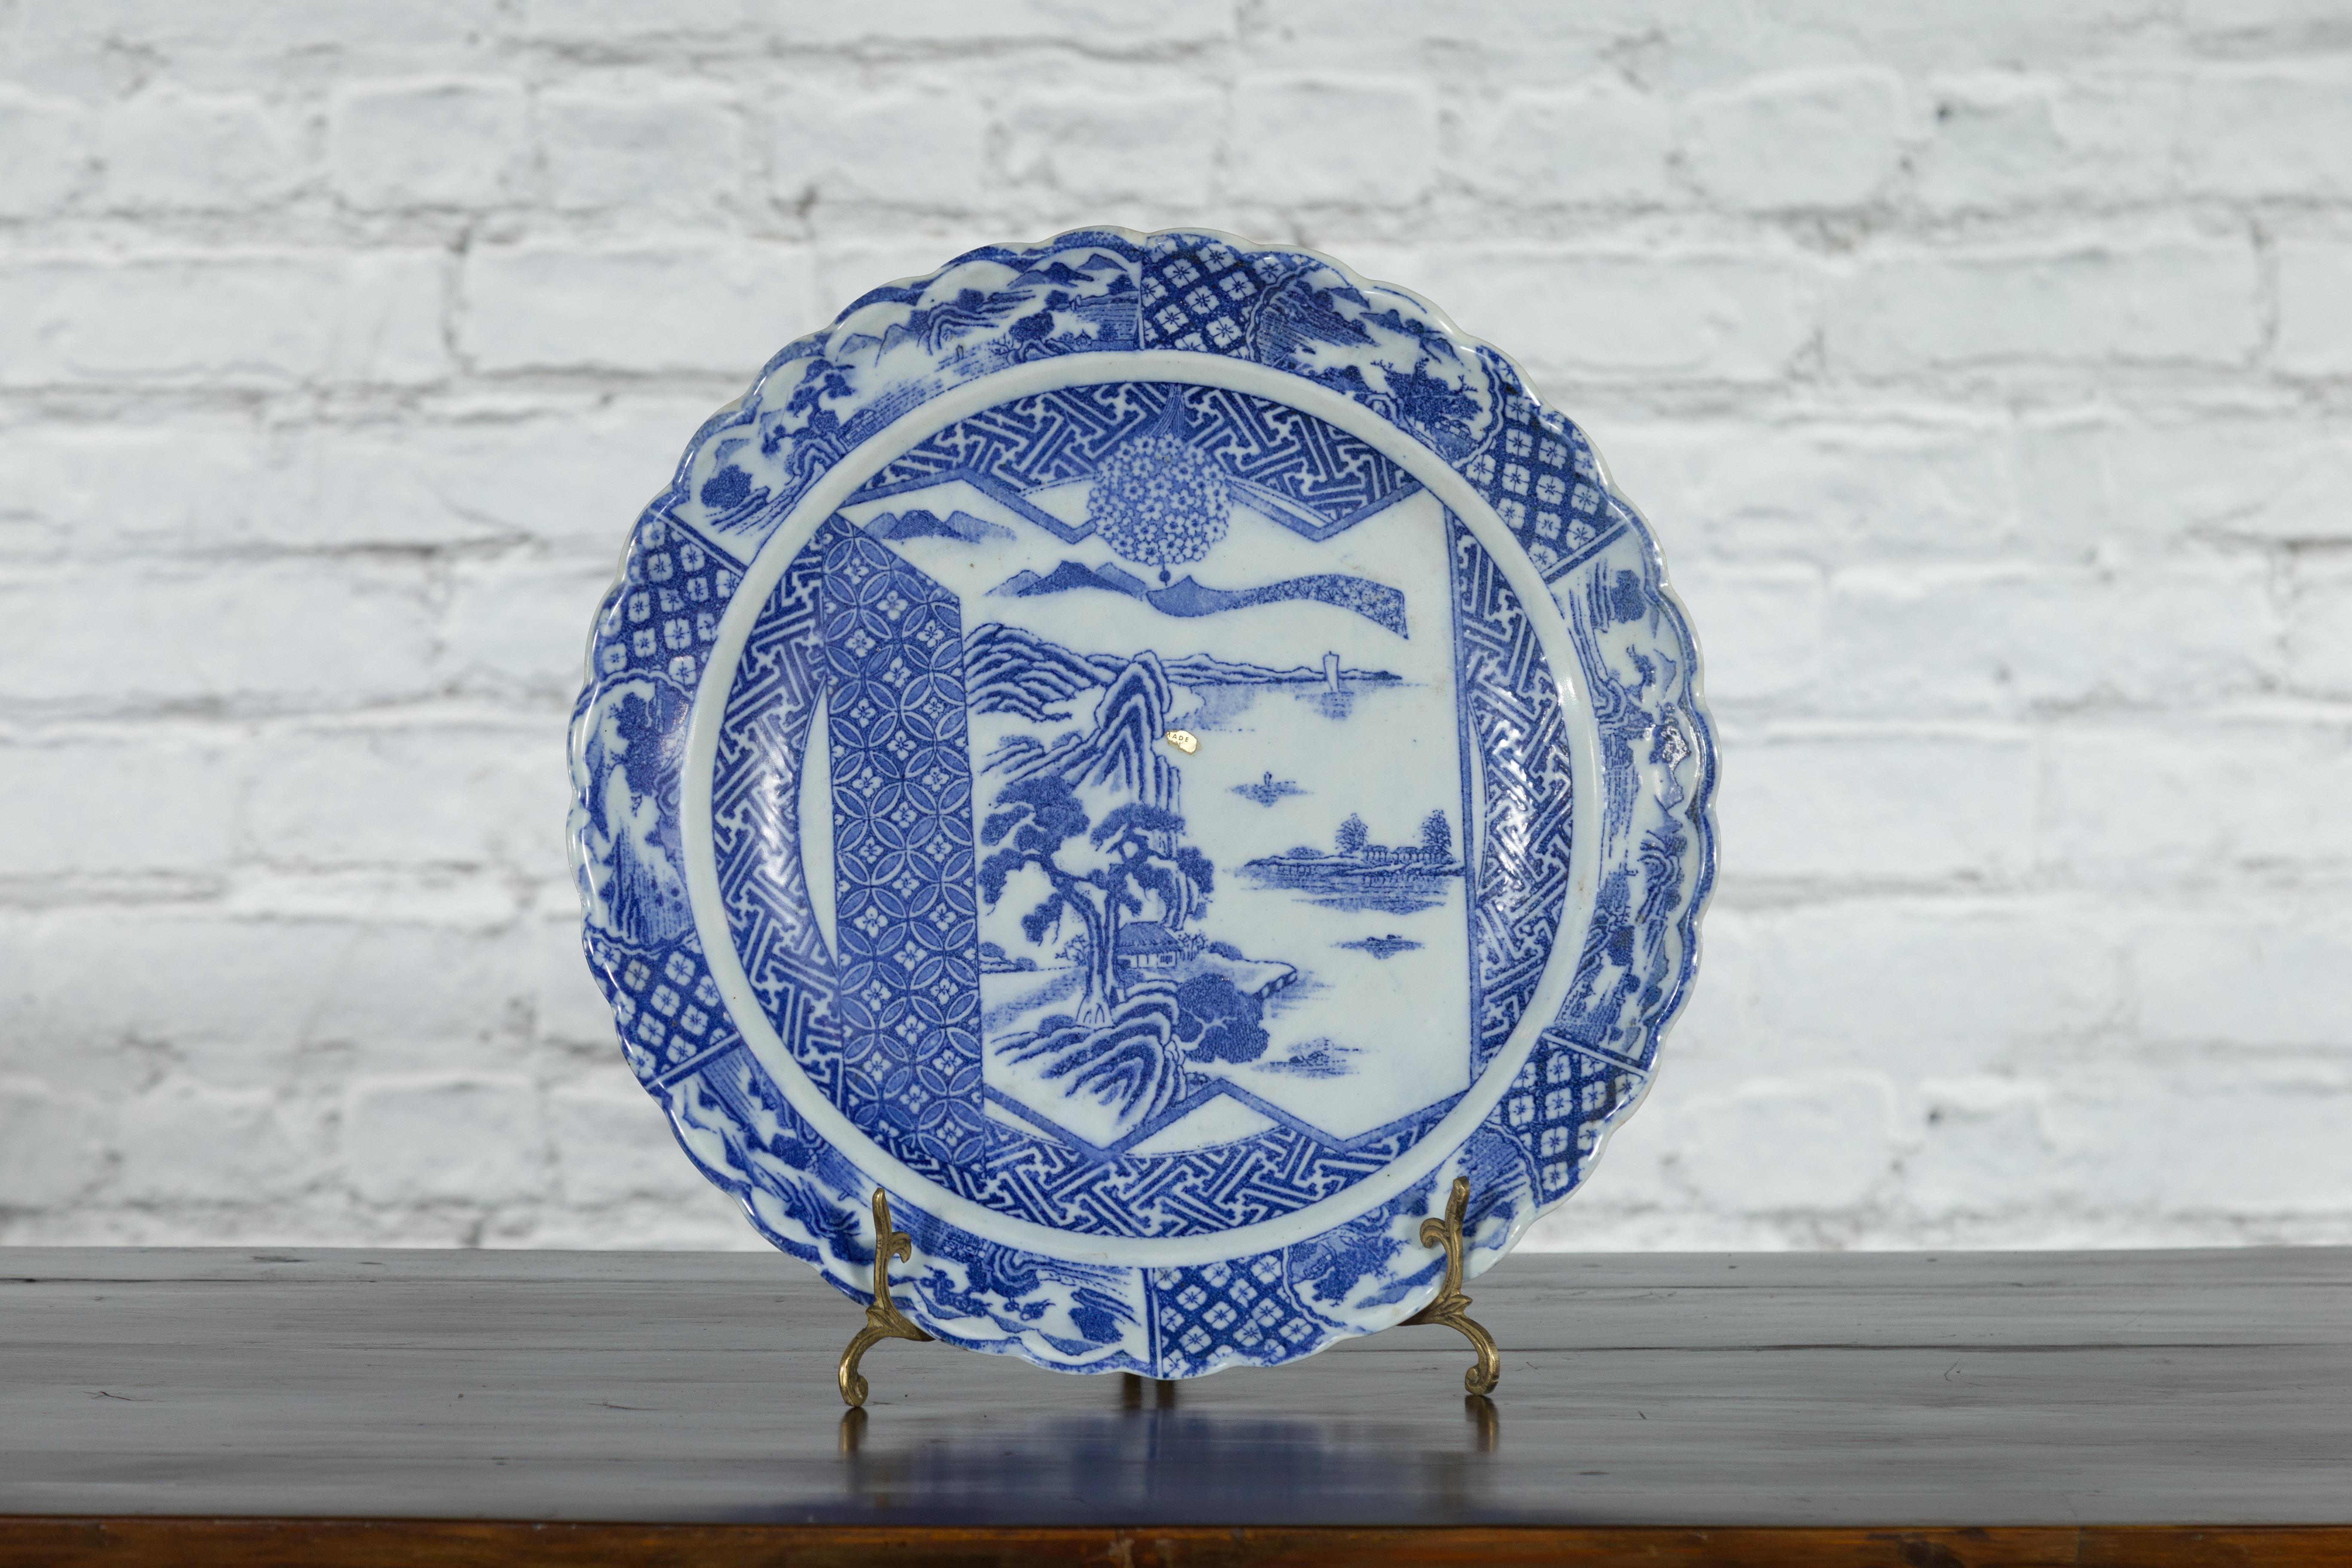 A Japanese porcelain plate from the 19th century, with hand-painted blue and white mountainous landscape and architecture décor, surrounded by geometric motifs. Created in Japan during the 19th century, this porcelain plate features a delicate blue